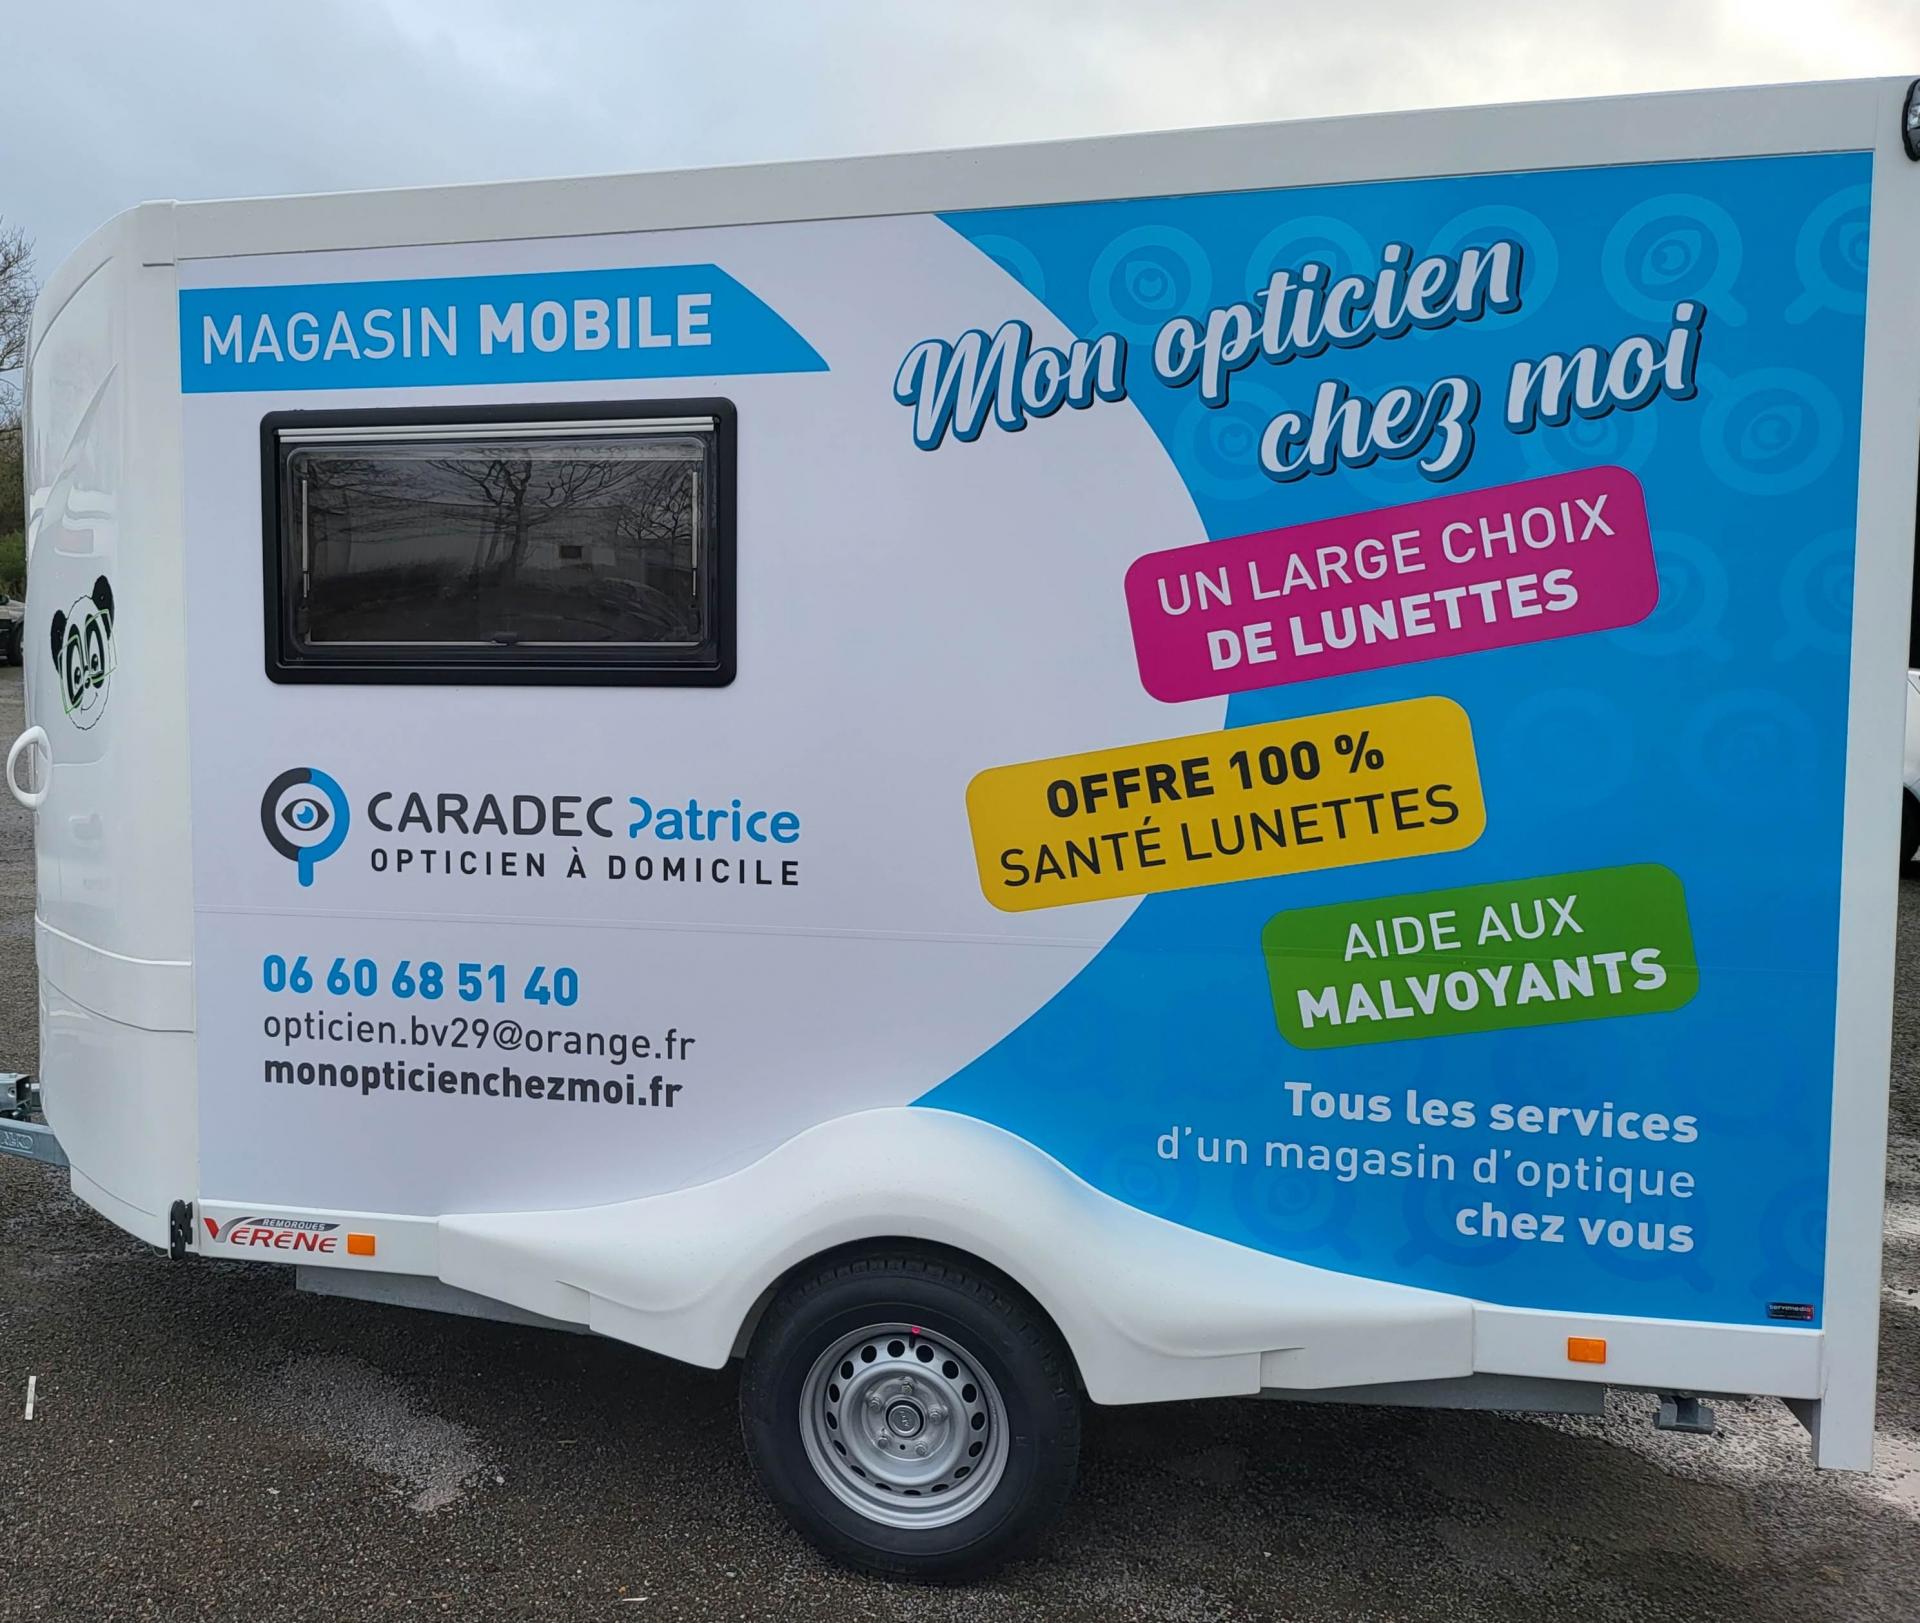 Magasin mobile